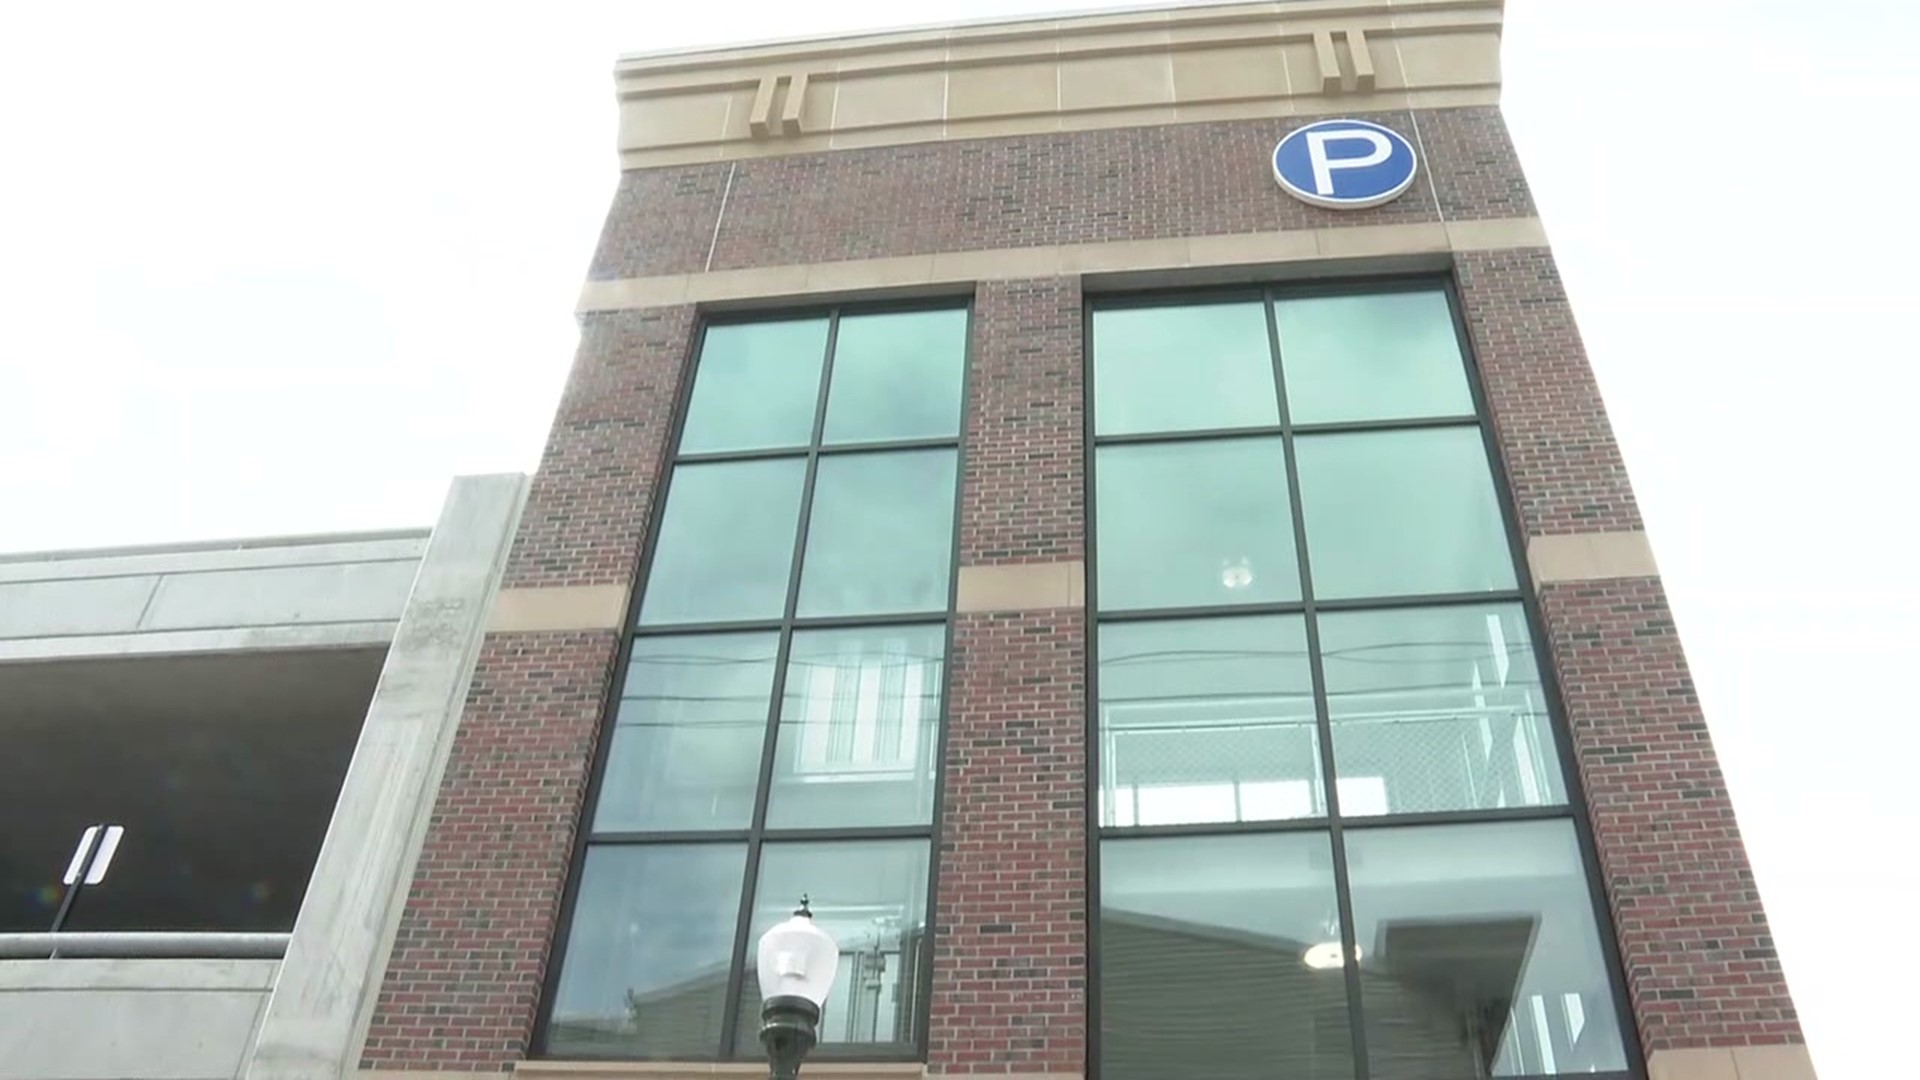 A new parking garage was unveiled in Schuylkill County and officials said it's an important part of one city's downtown.